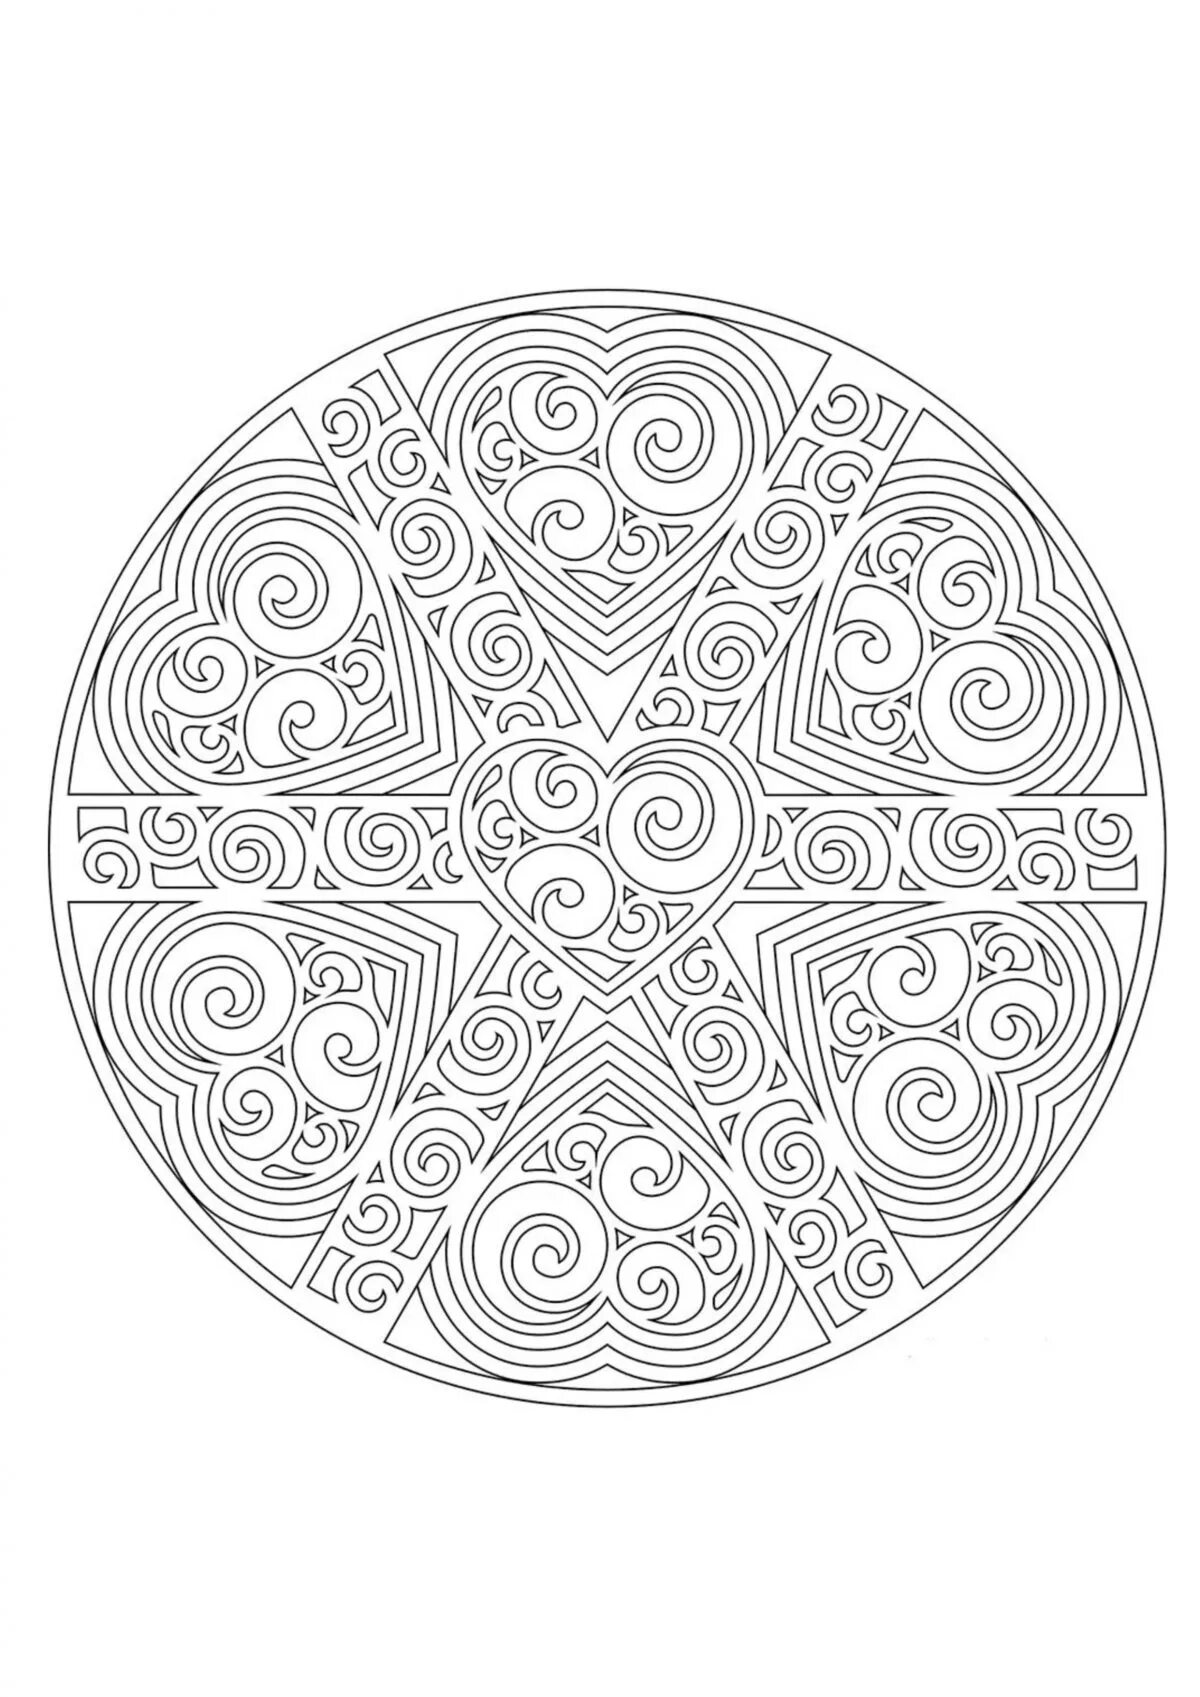 Coloring page with a pattern of bright circles